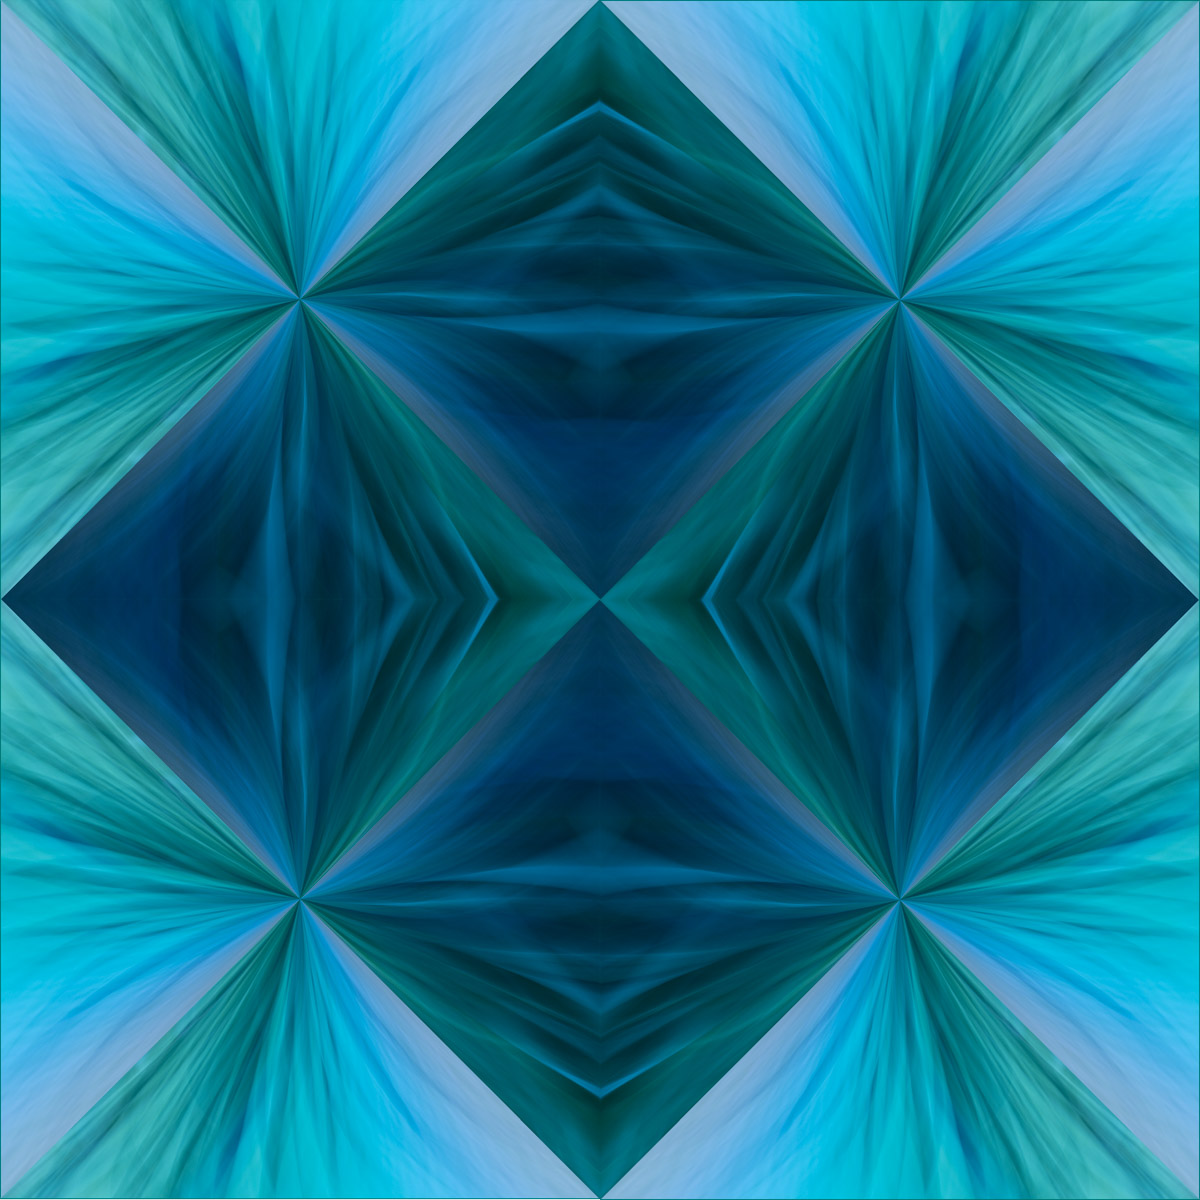 A blue and green abstract image with a diamond pattern.